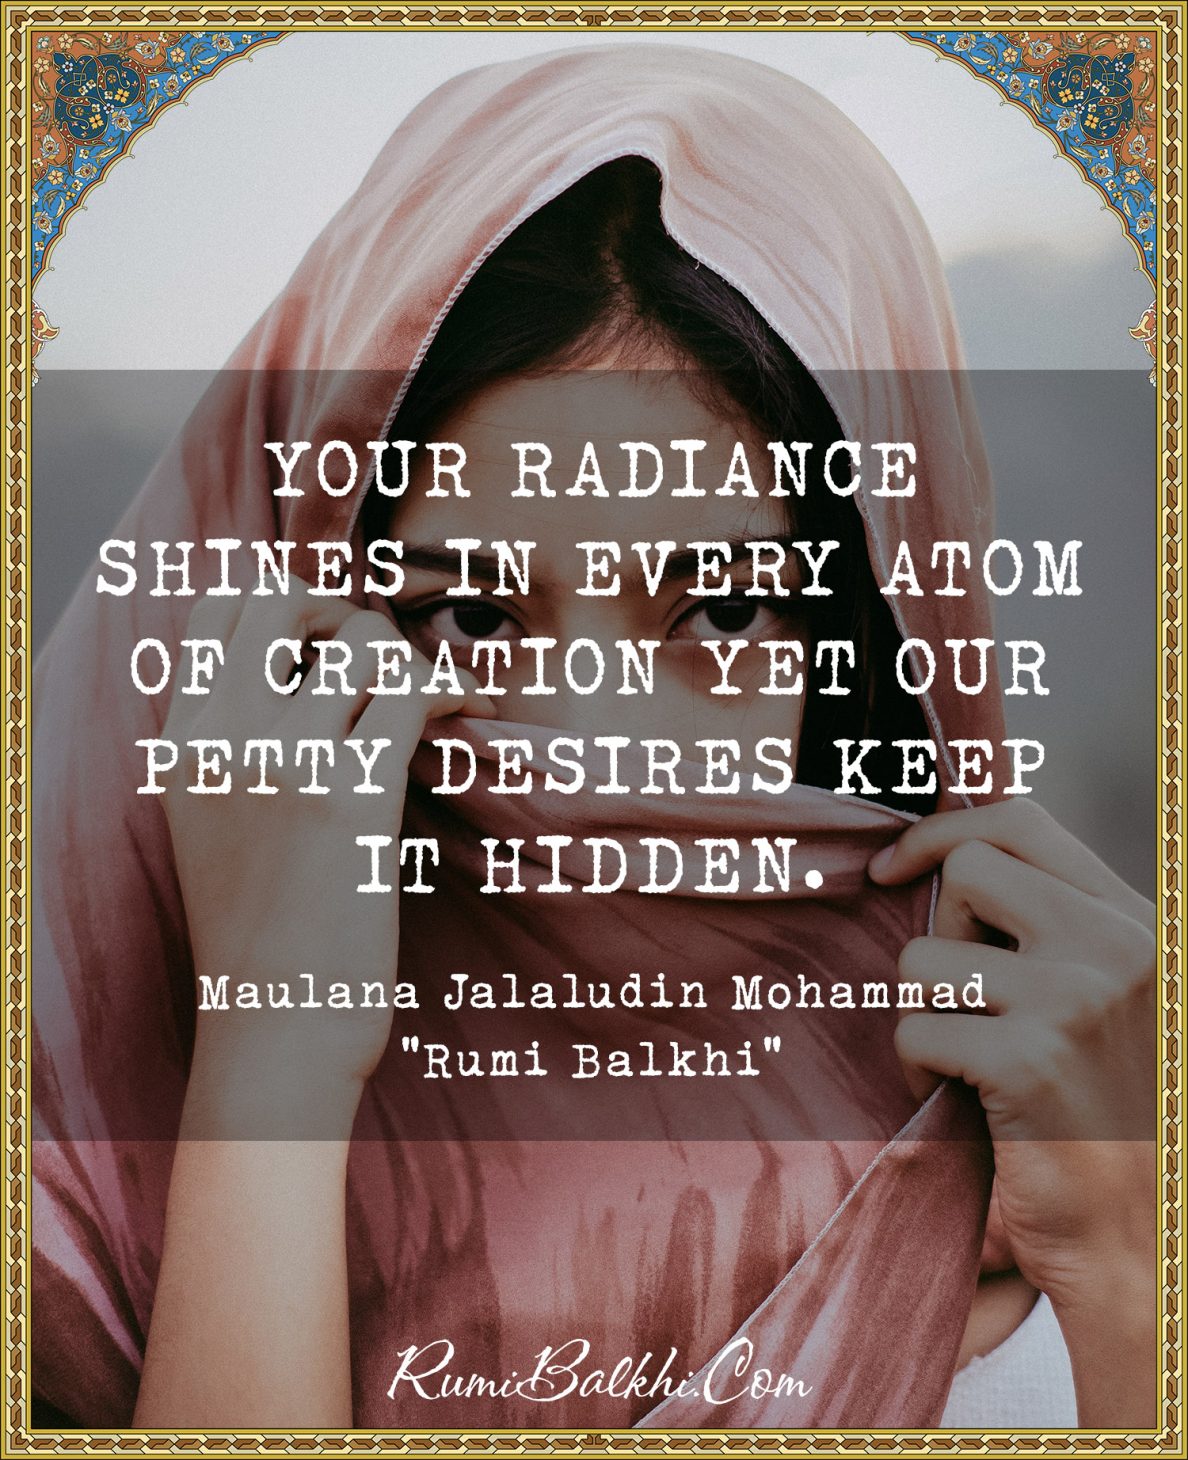 Your radiance shines in every atom of creation yet our petty desires keep it hidden